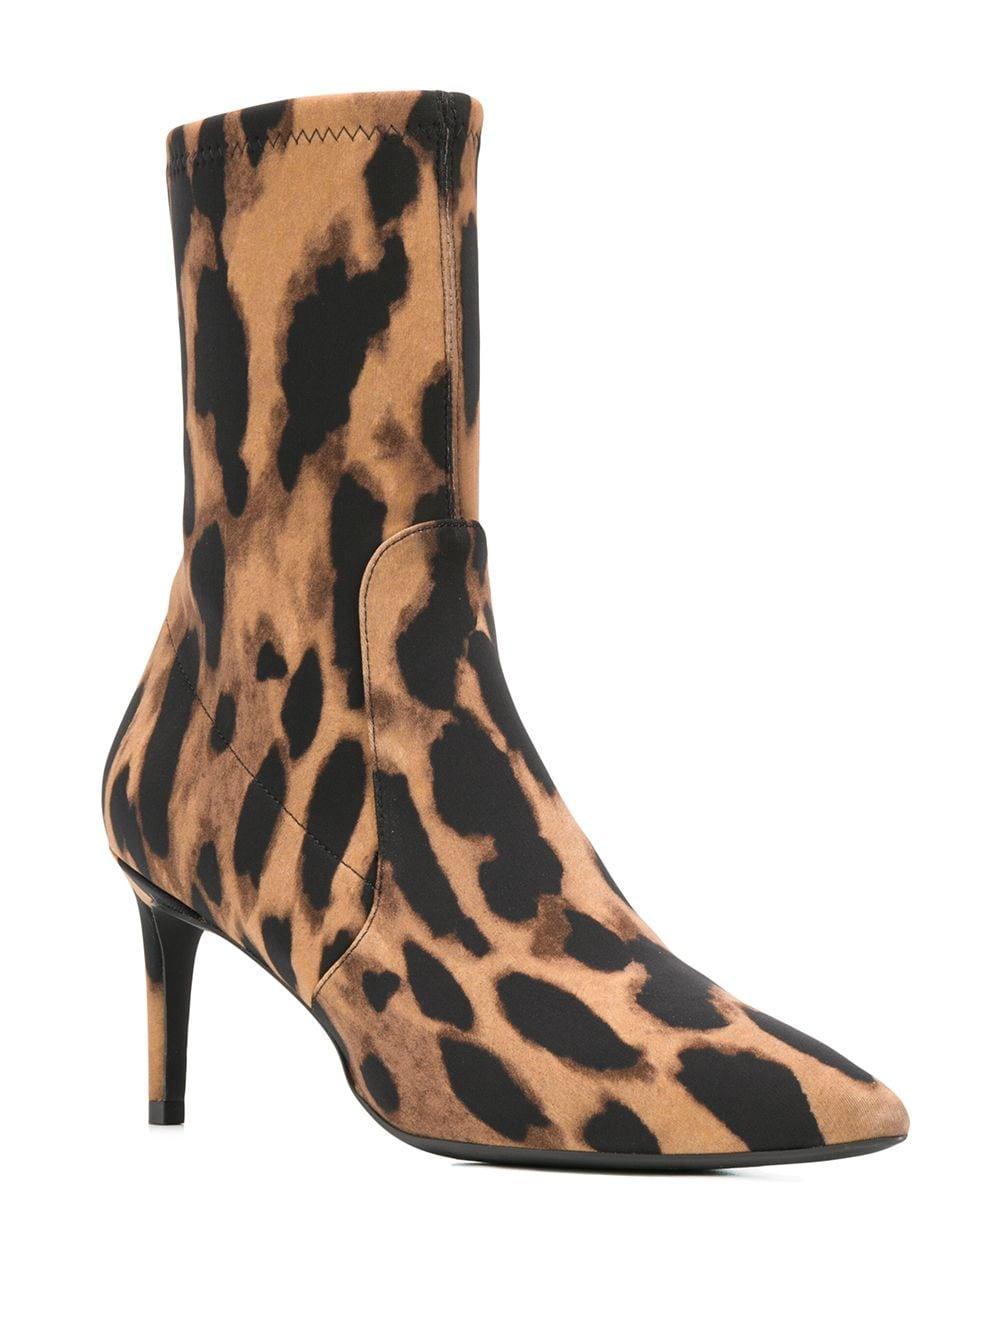 Stuart Weitzman Leather Leopard Print Ankle Boots in Brown - Lyst